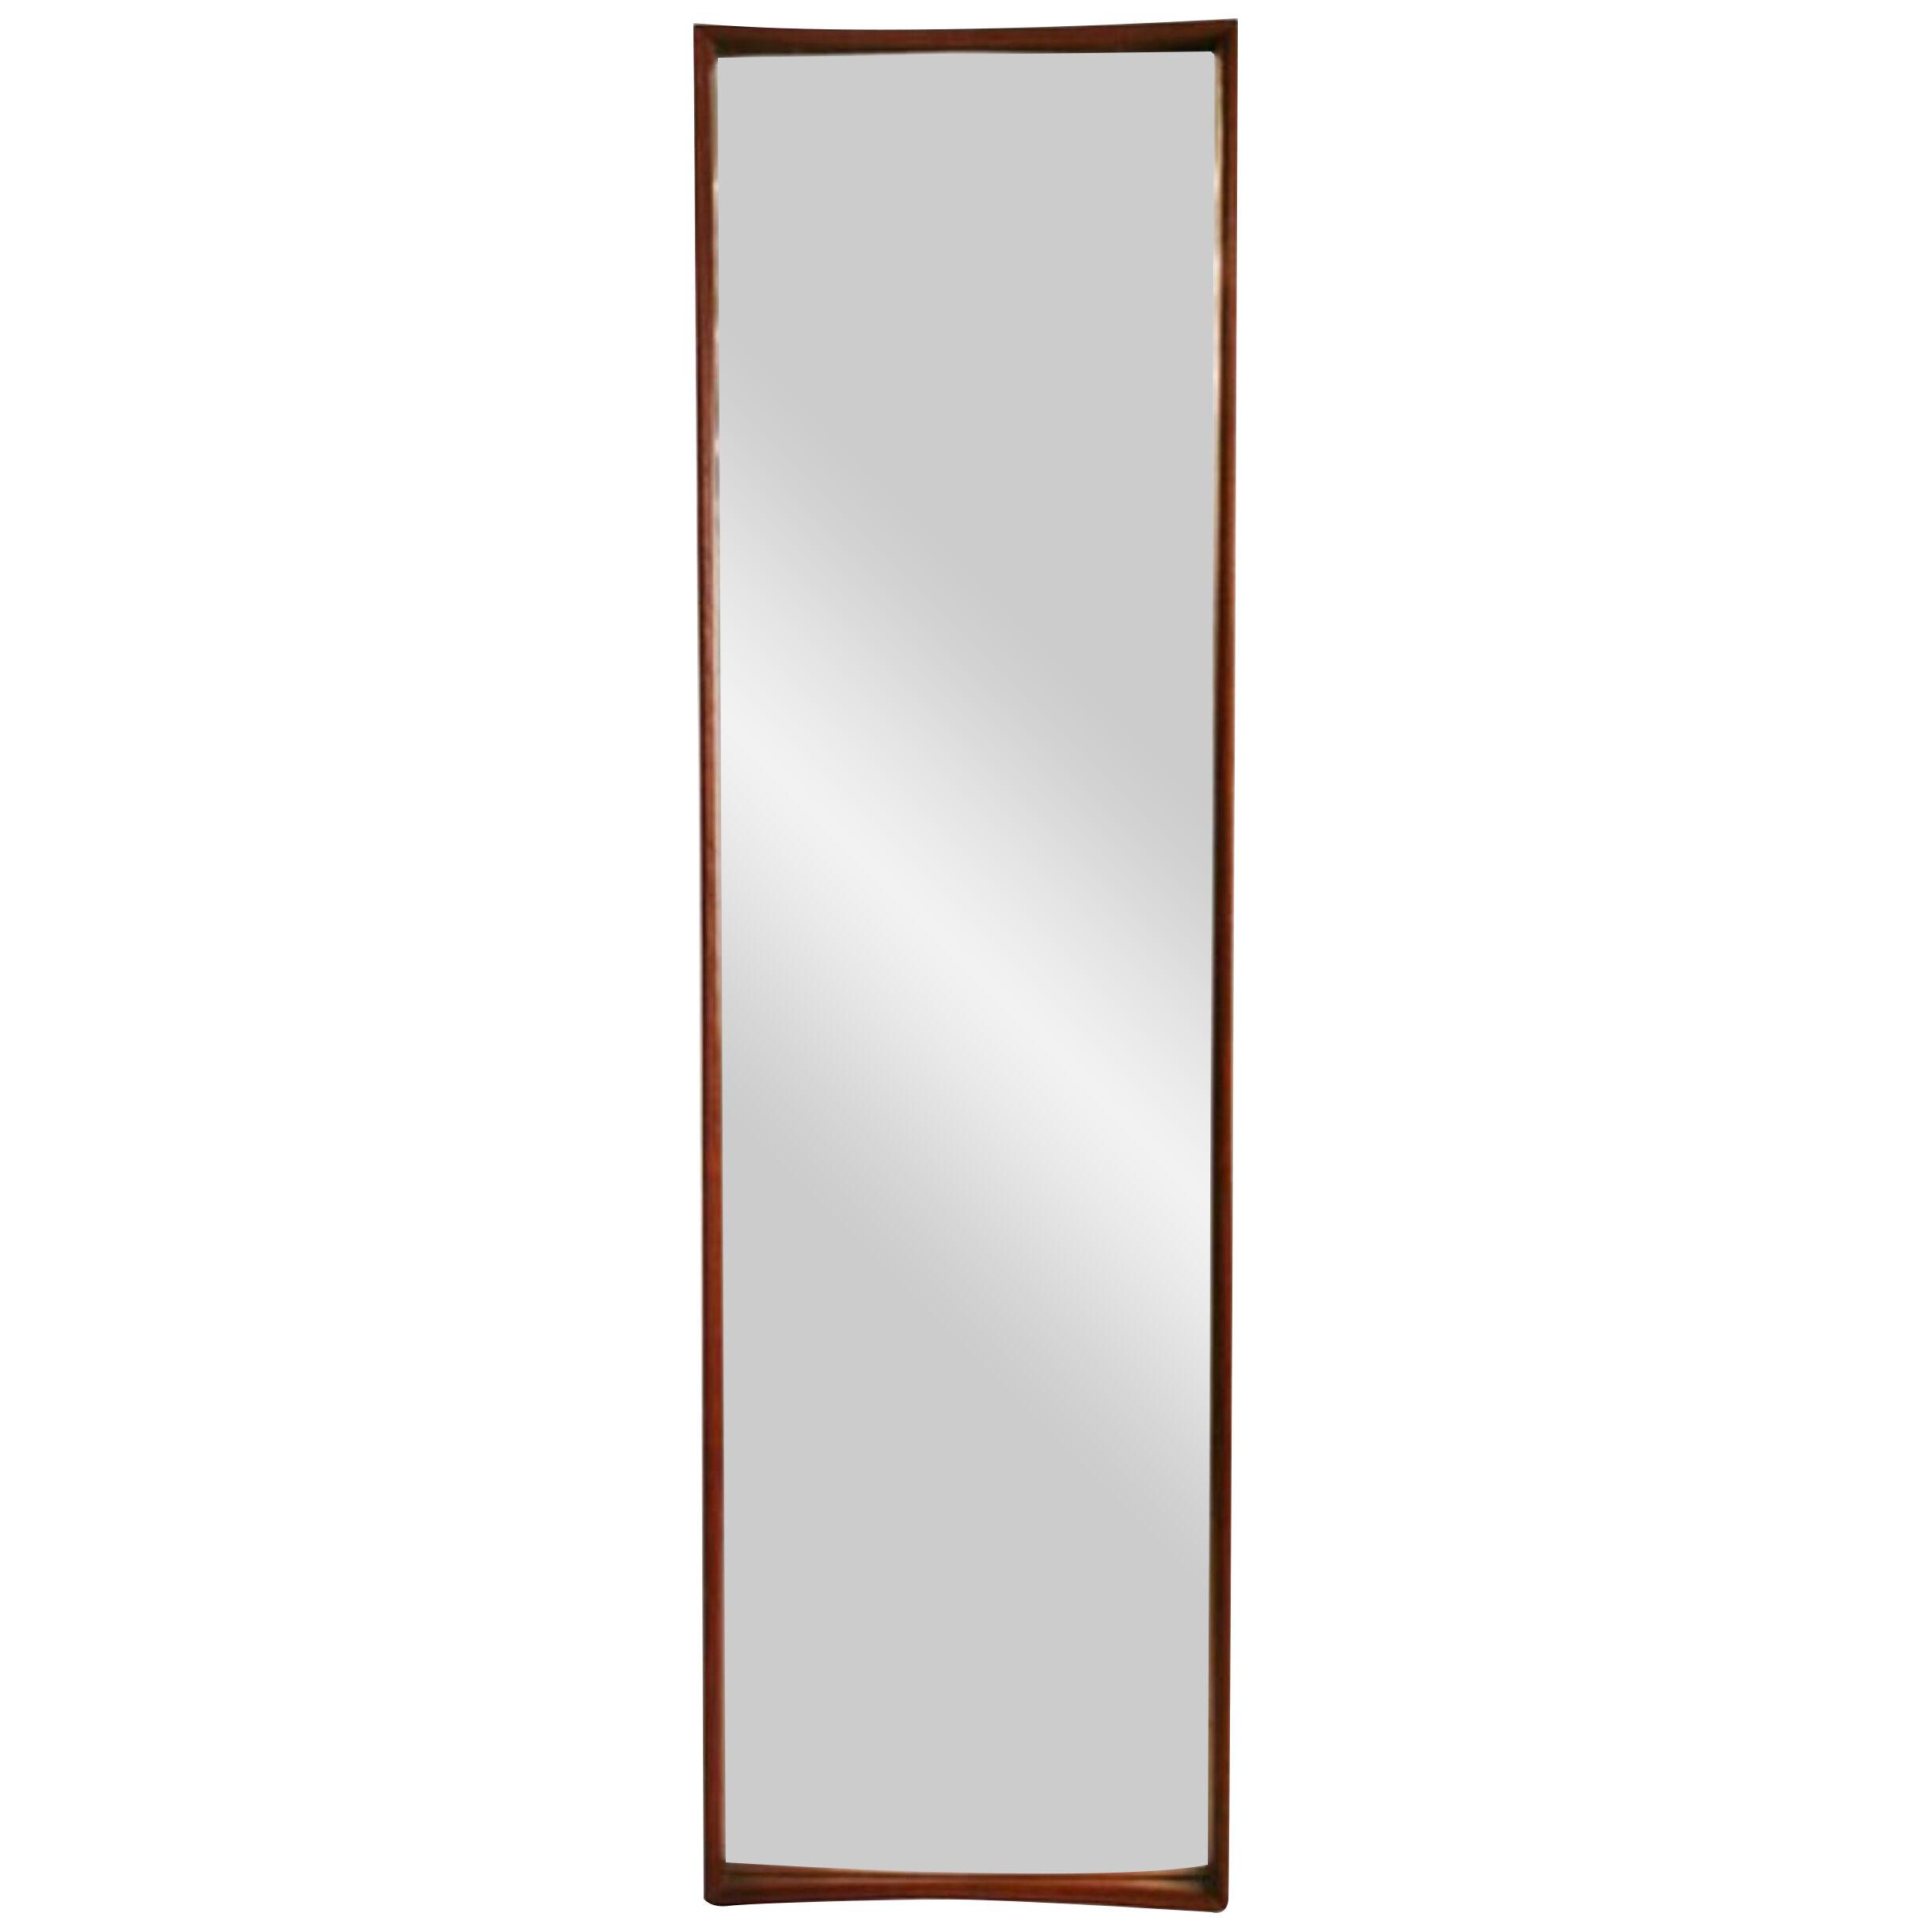 Swedish Tall Teak Framed Entry Mirror by AB Glas and Trä	